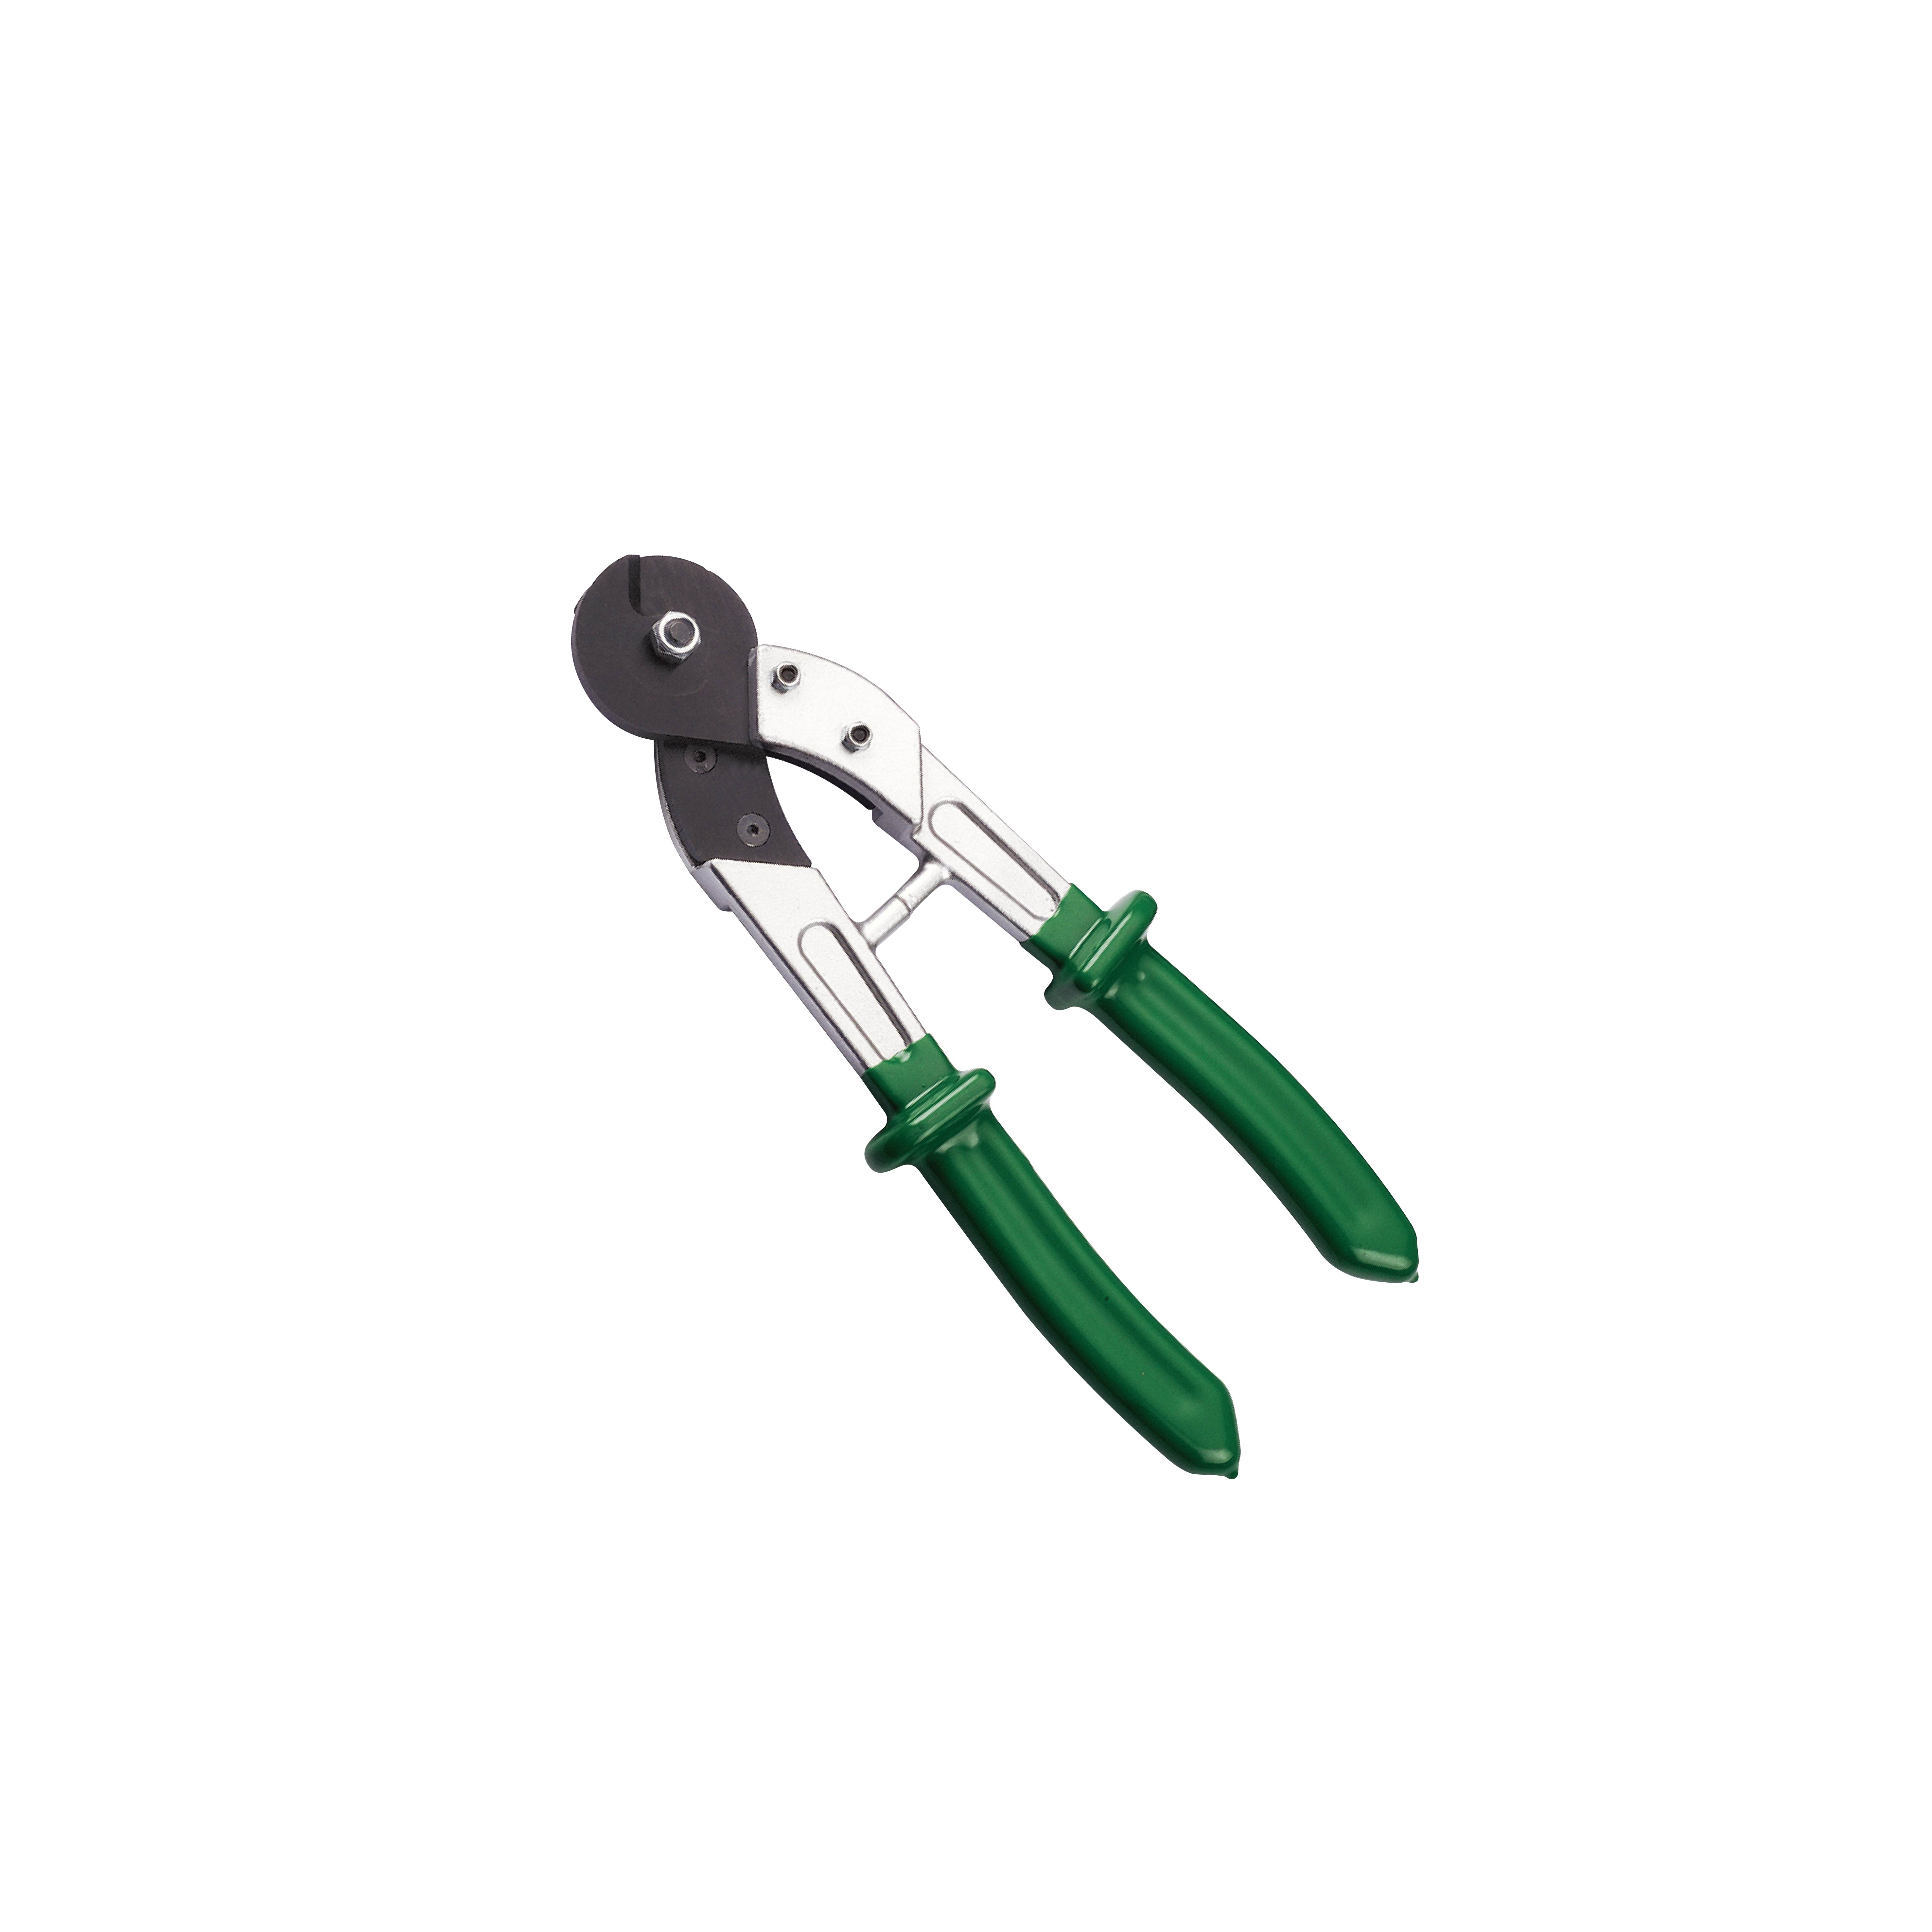 AC-110 HAND CABLE CUTTERS